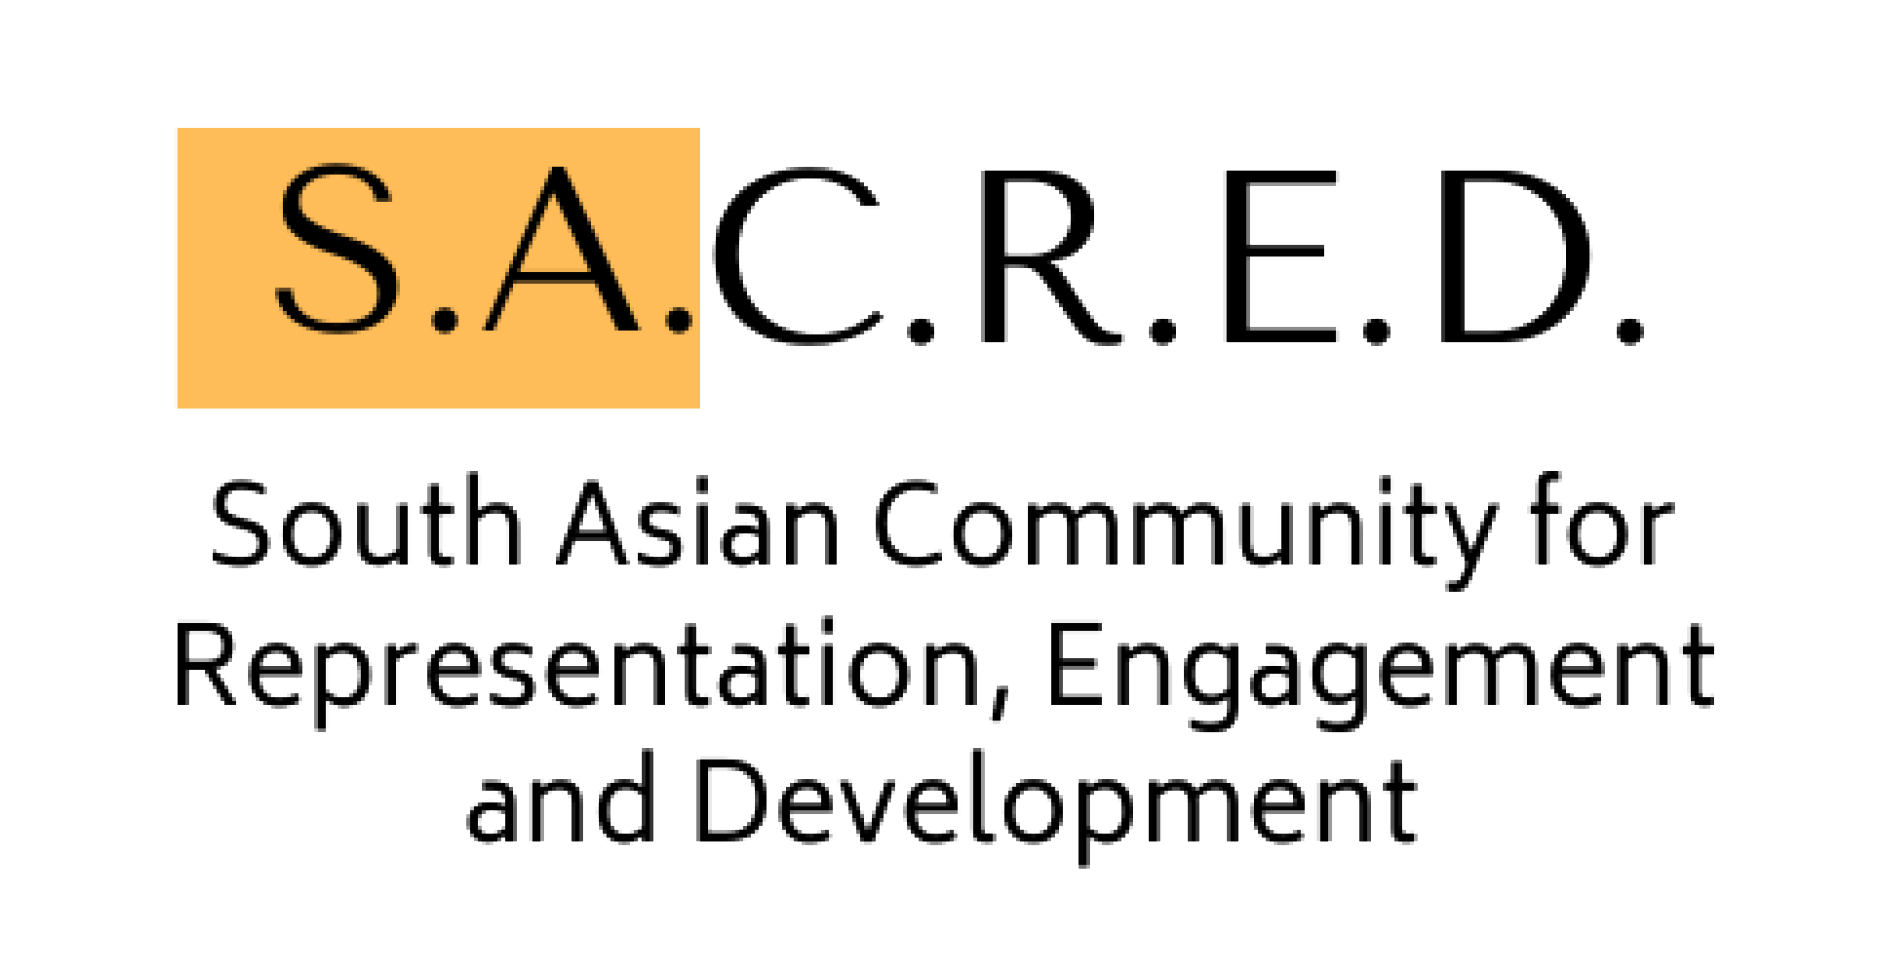 South Asian Community for Representation, Engagement and Development